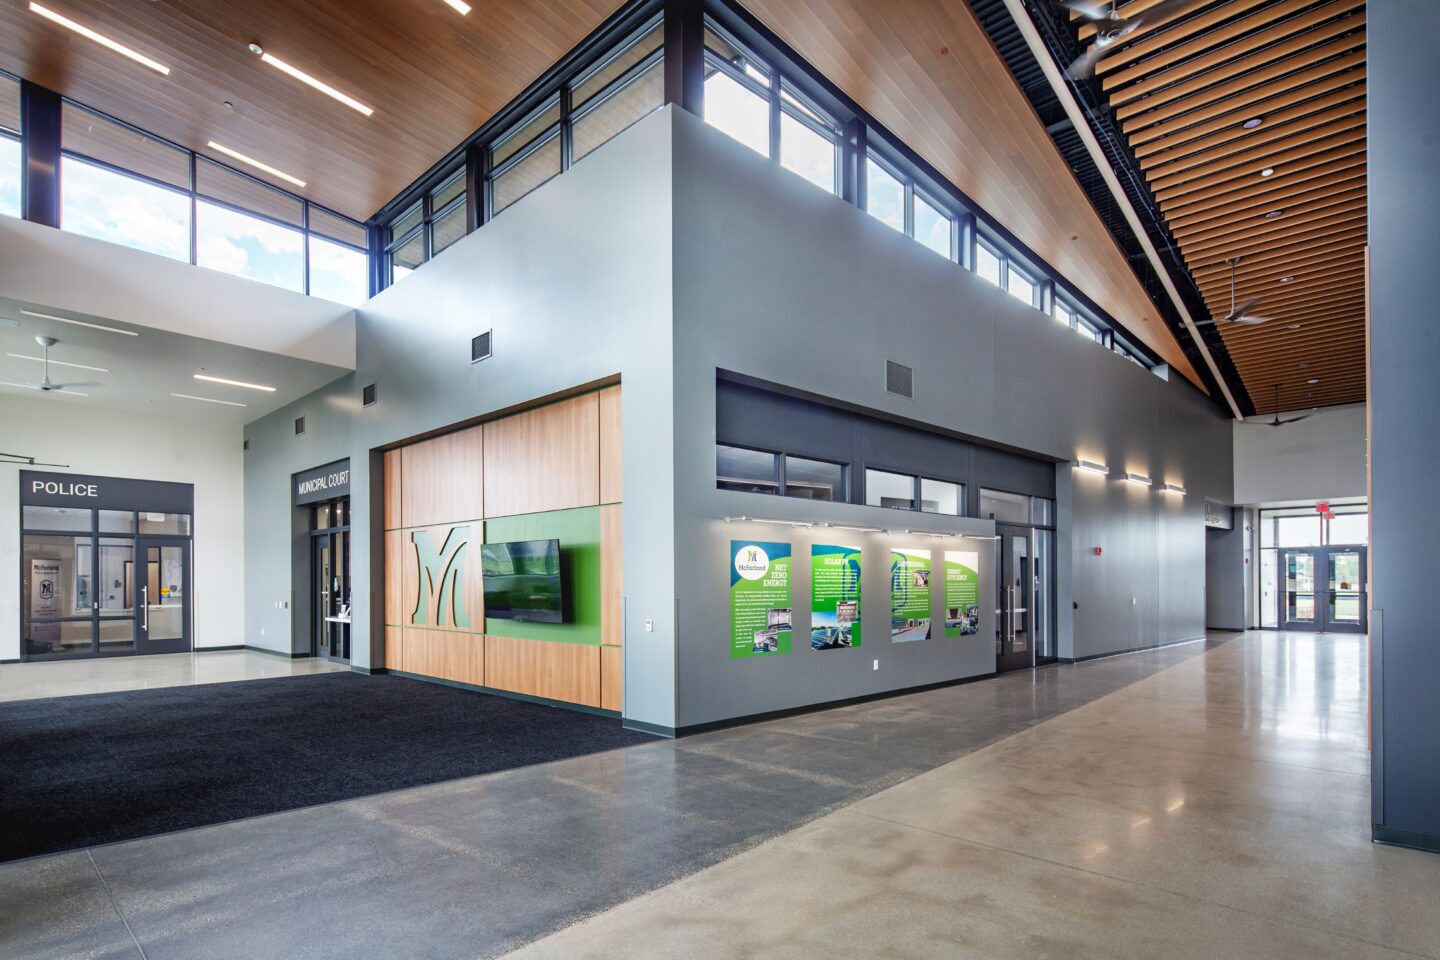 Lobby area featuring clerestory windows, police and municipal court entrances and branding graphics on the wall